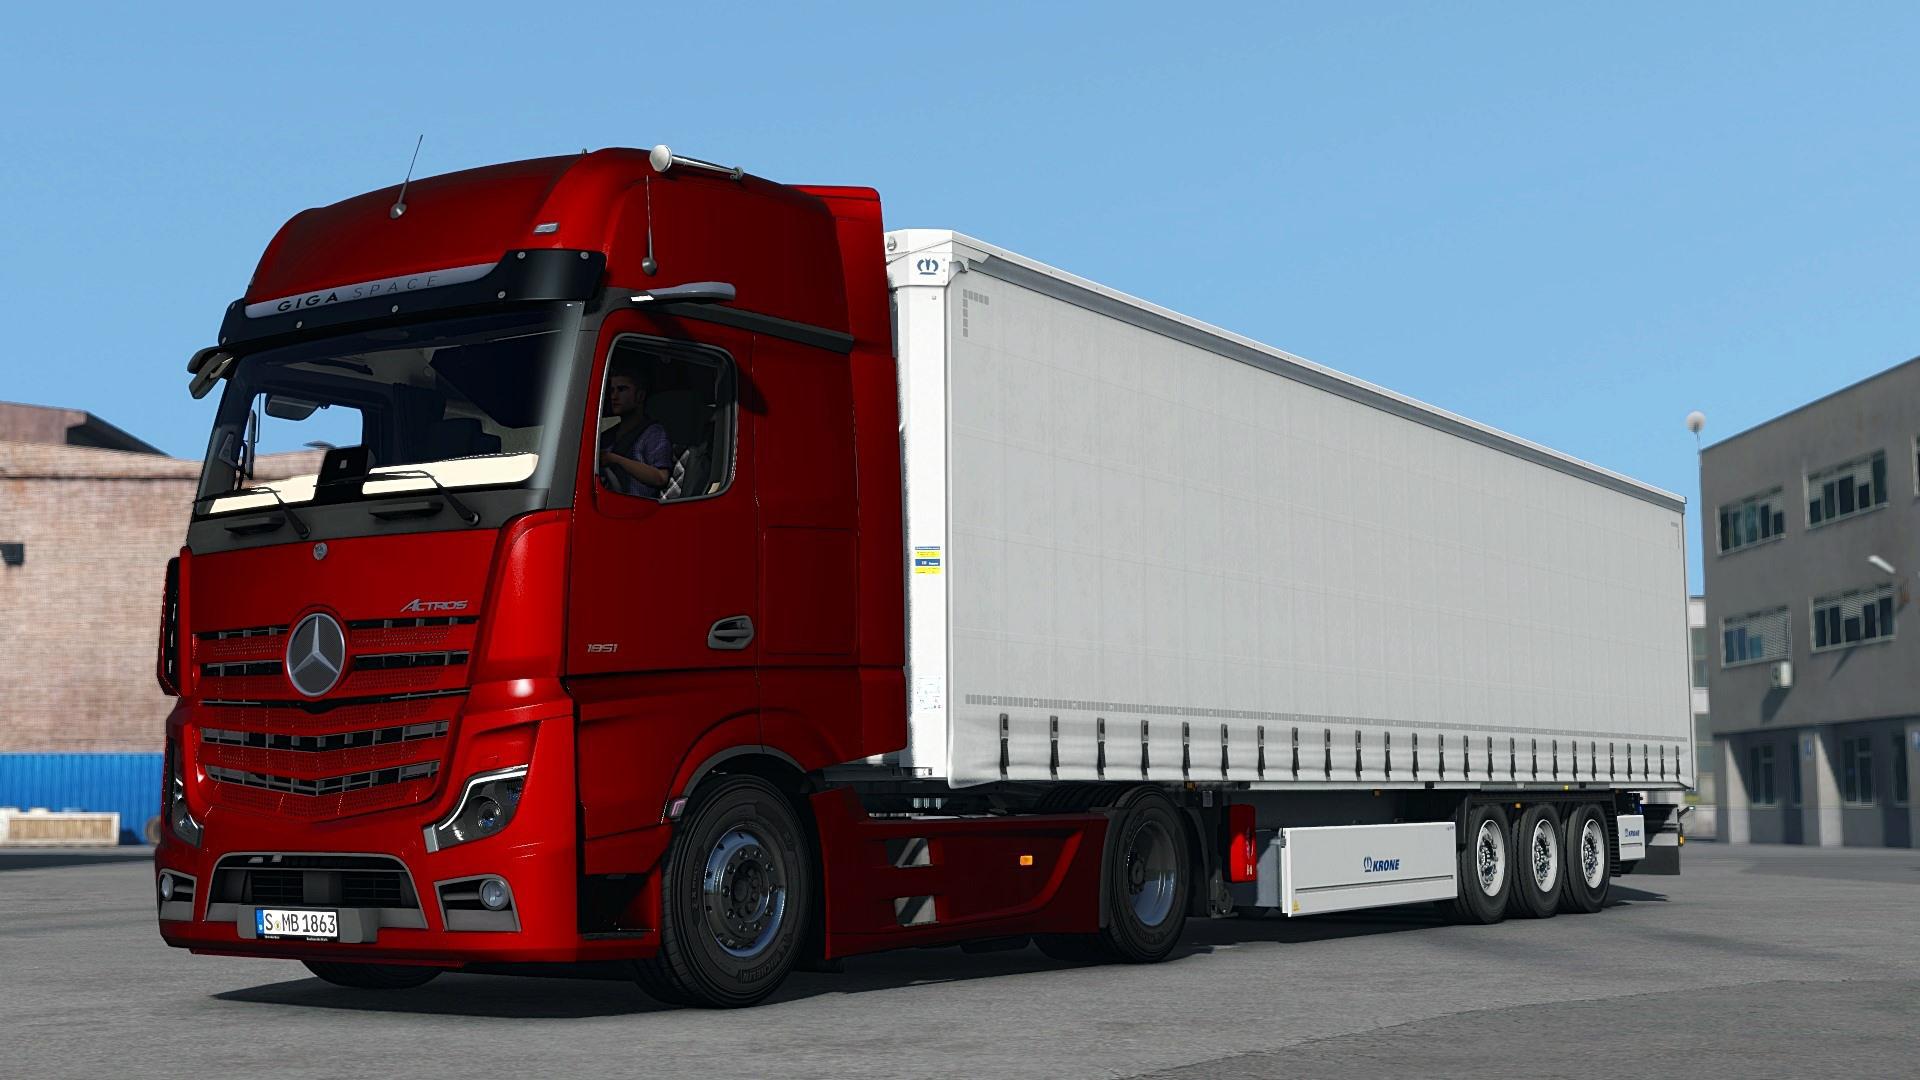 ETS2 1.38 MODS - LKW Tuning ▶️ Mercedes Benz Actros MP5 2019